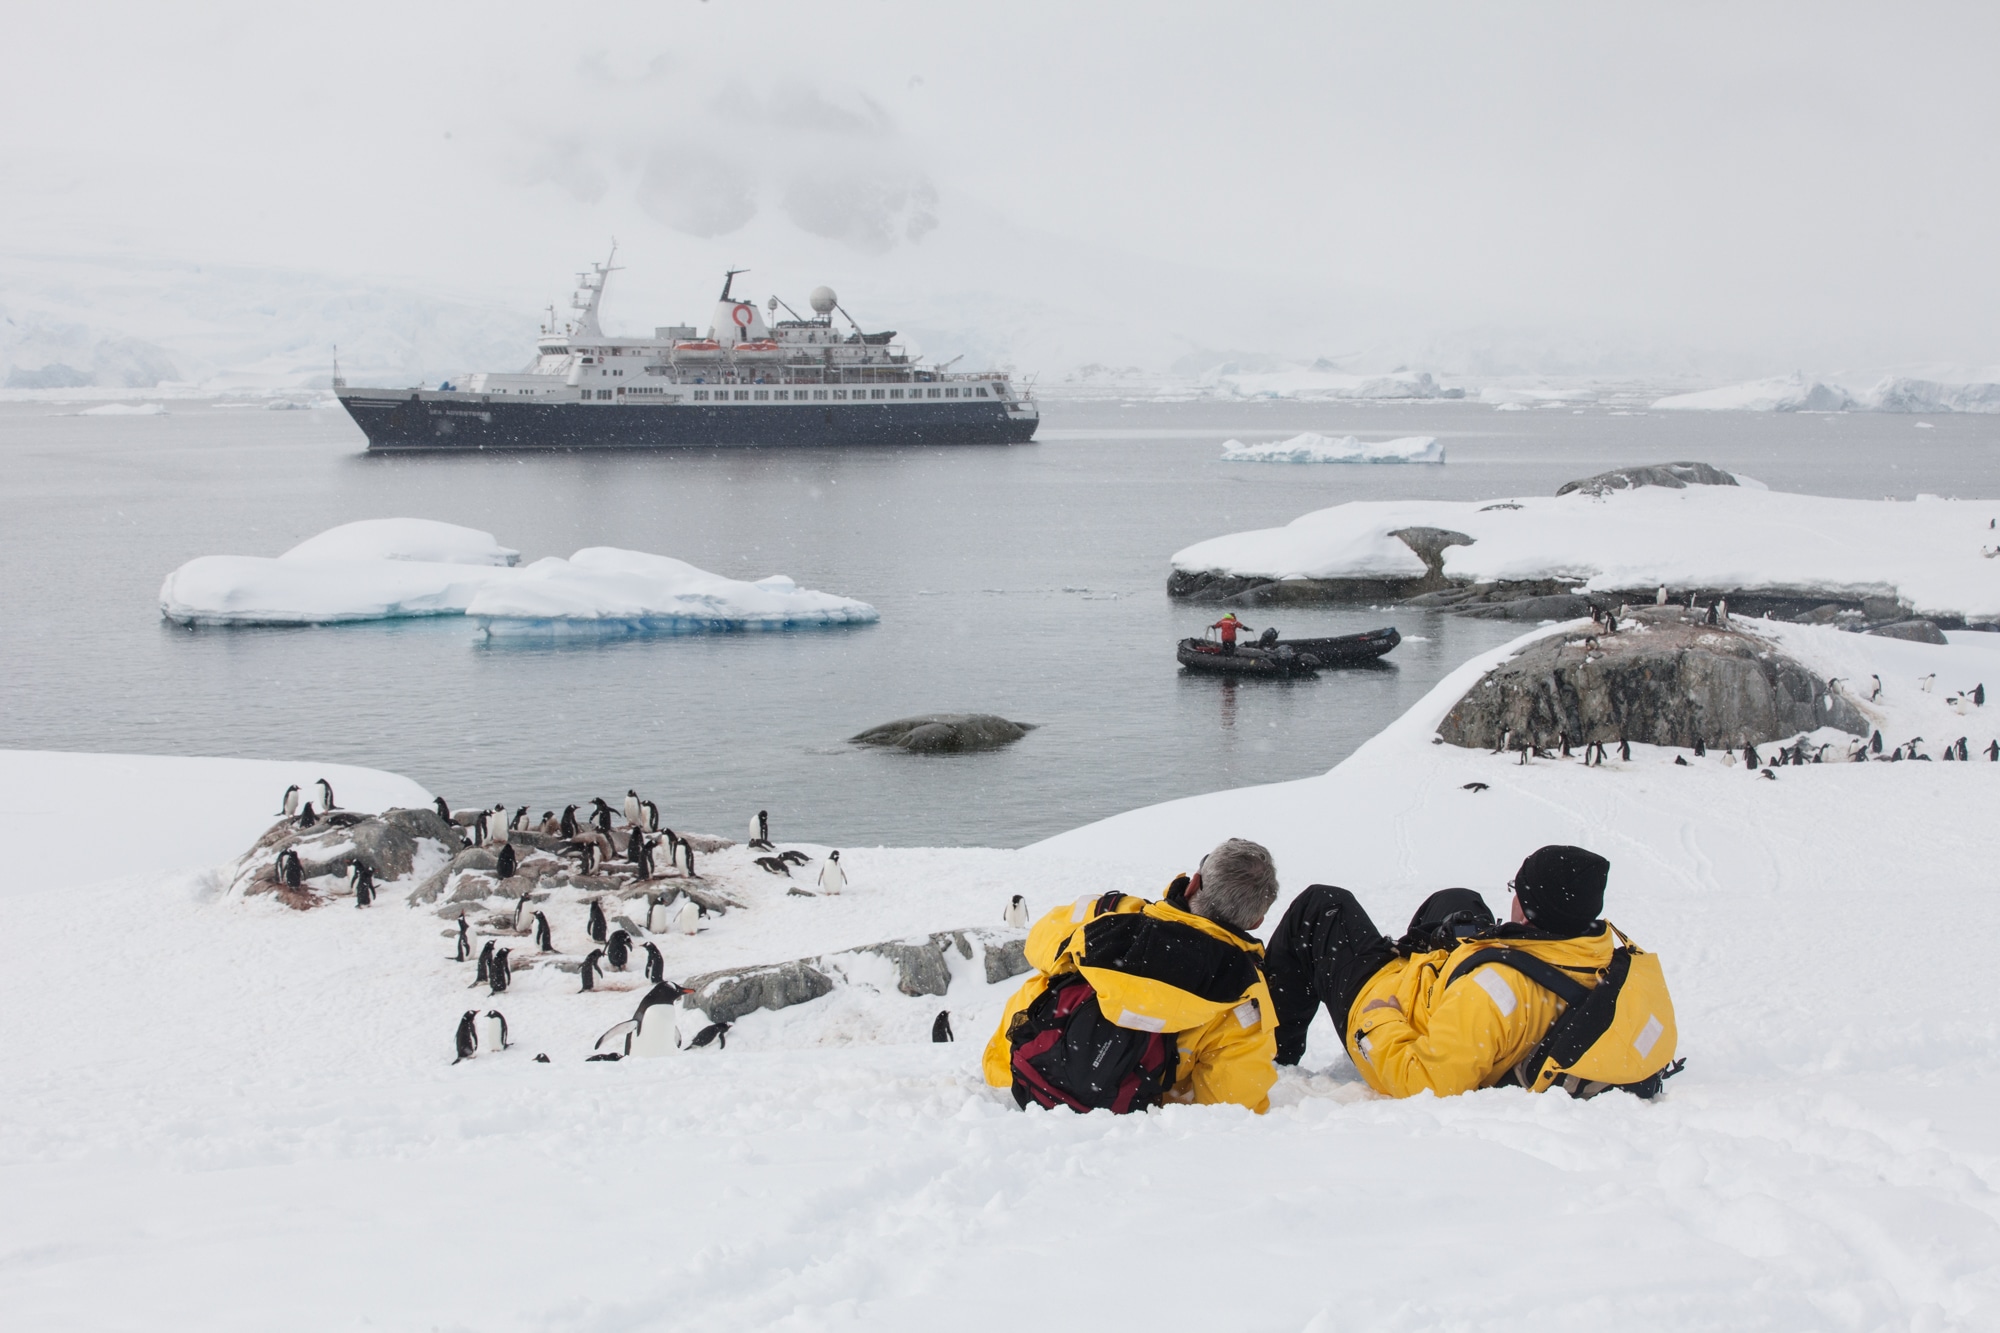 Quark Expeditions guests fully immerse themselves in the Antarctic environment during an off-ship excursion.